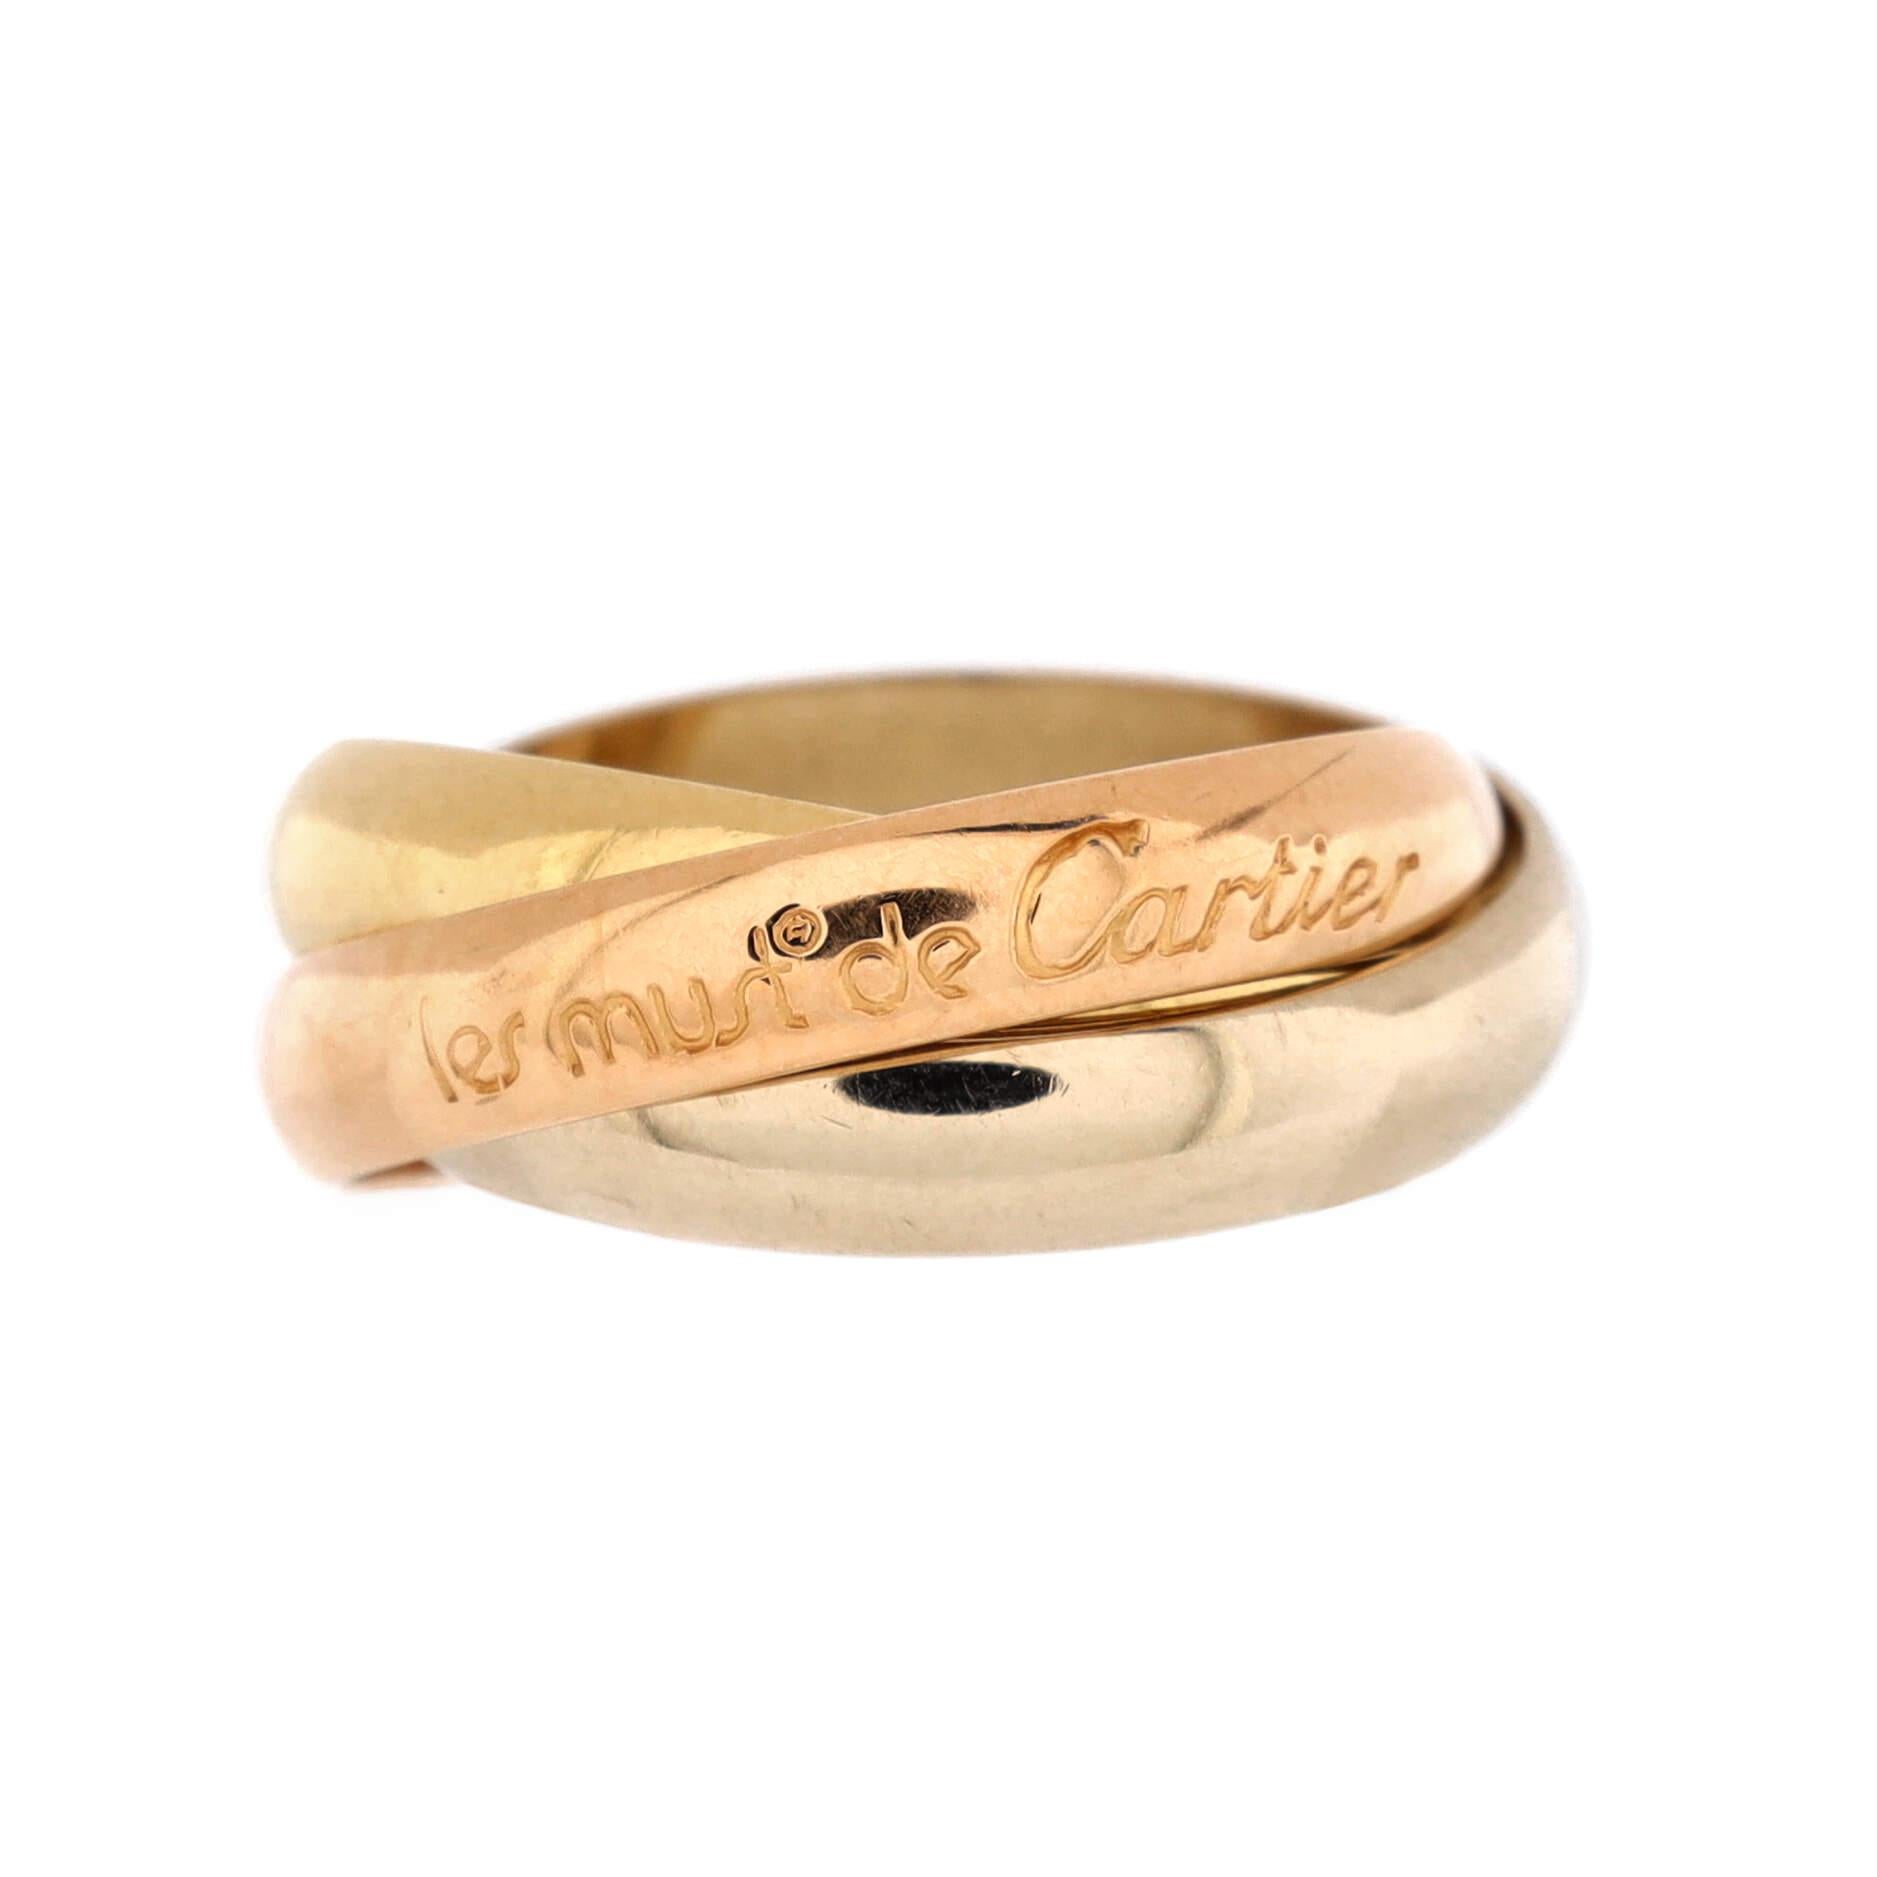 Condition: Very good. Moderate wear throughout.
Accessories: No Accessories
Measurements: Size: 4.75 - 49, Width: 3.50 mm
Designer: Cartier
Model: Trinity Ring 18K Tricolor Gold Medium
Exterior Color: Tricolor Gold
Item Number: 226484/15